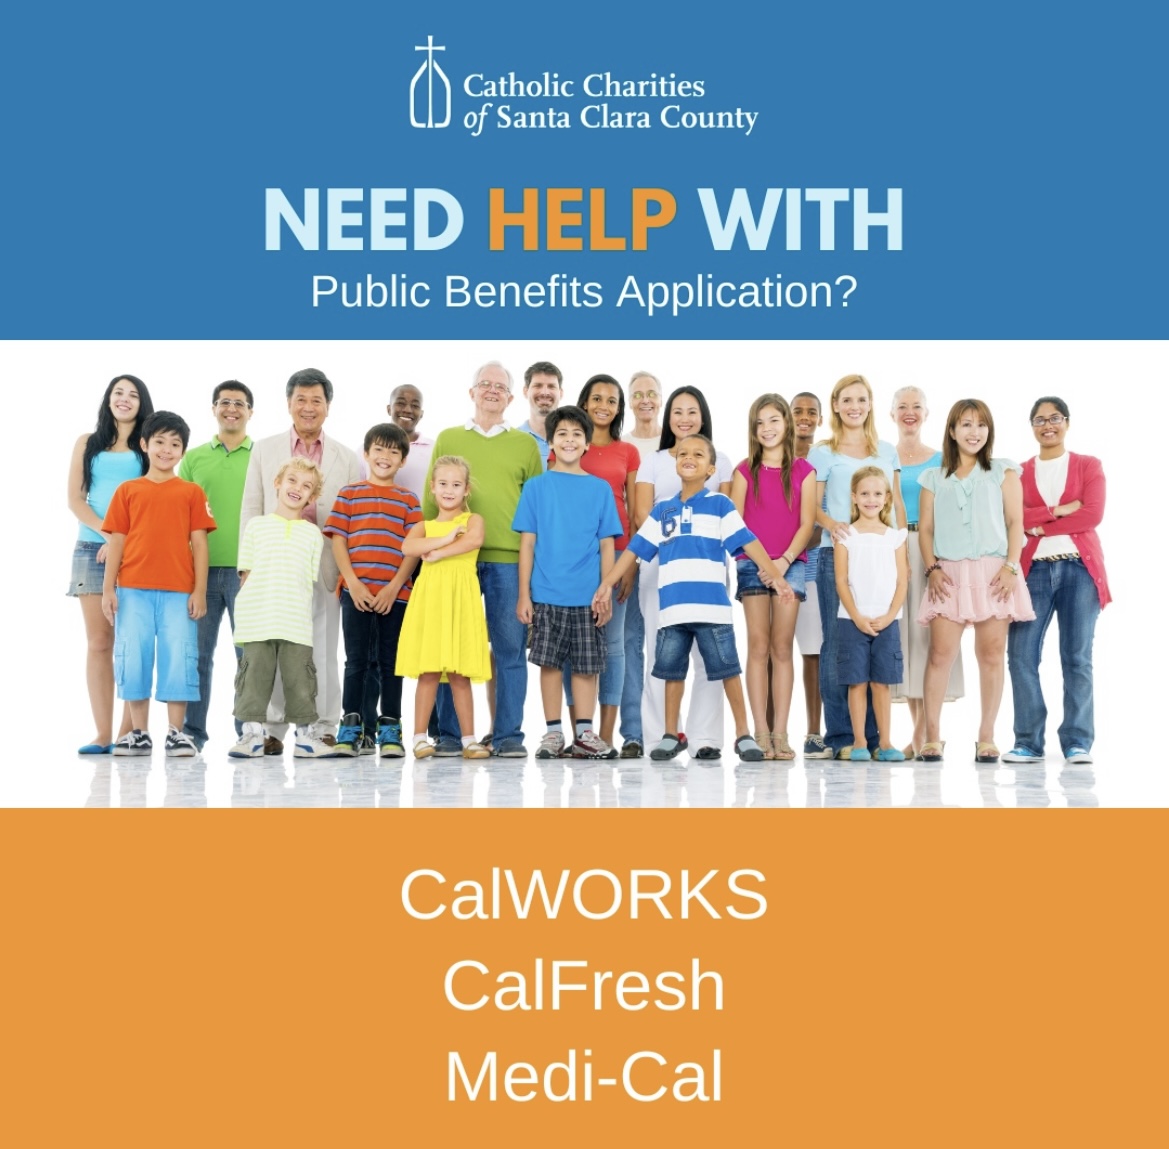 CCSCC Public Benefits Team is here to help you apply for these public benefits - CalWorks, Cal Fresh, and Medi-Cal. Find more information at ccscc.org/family-asset-d… #CalFreshHealthyLiving #calfreshfood #calworks #CalFresh #Calworks #medical #calfresh #communitysupport #benefits